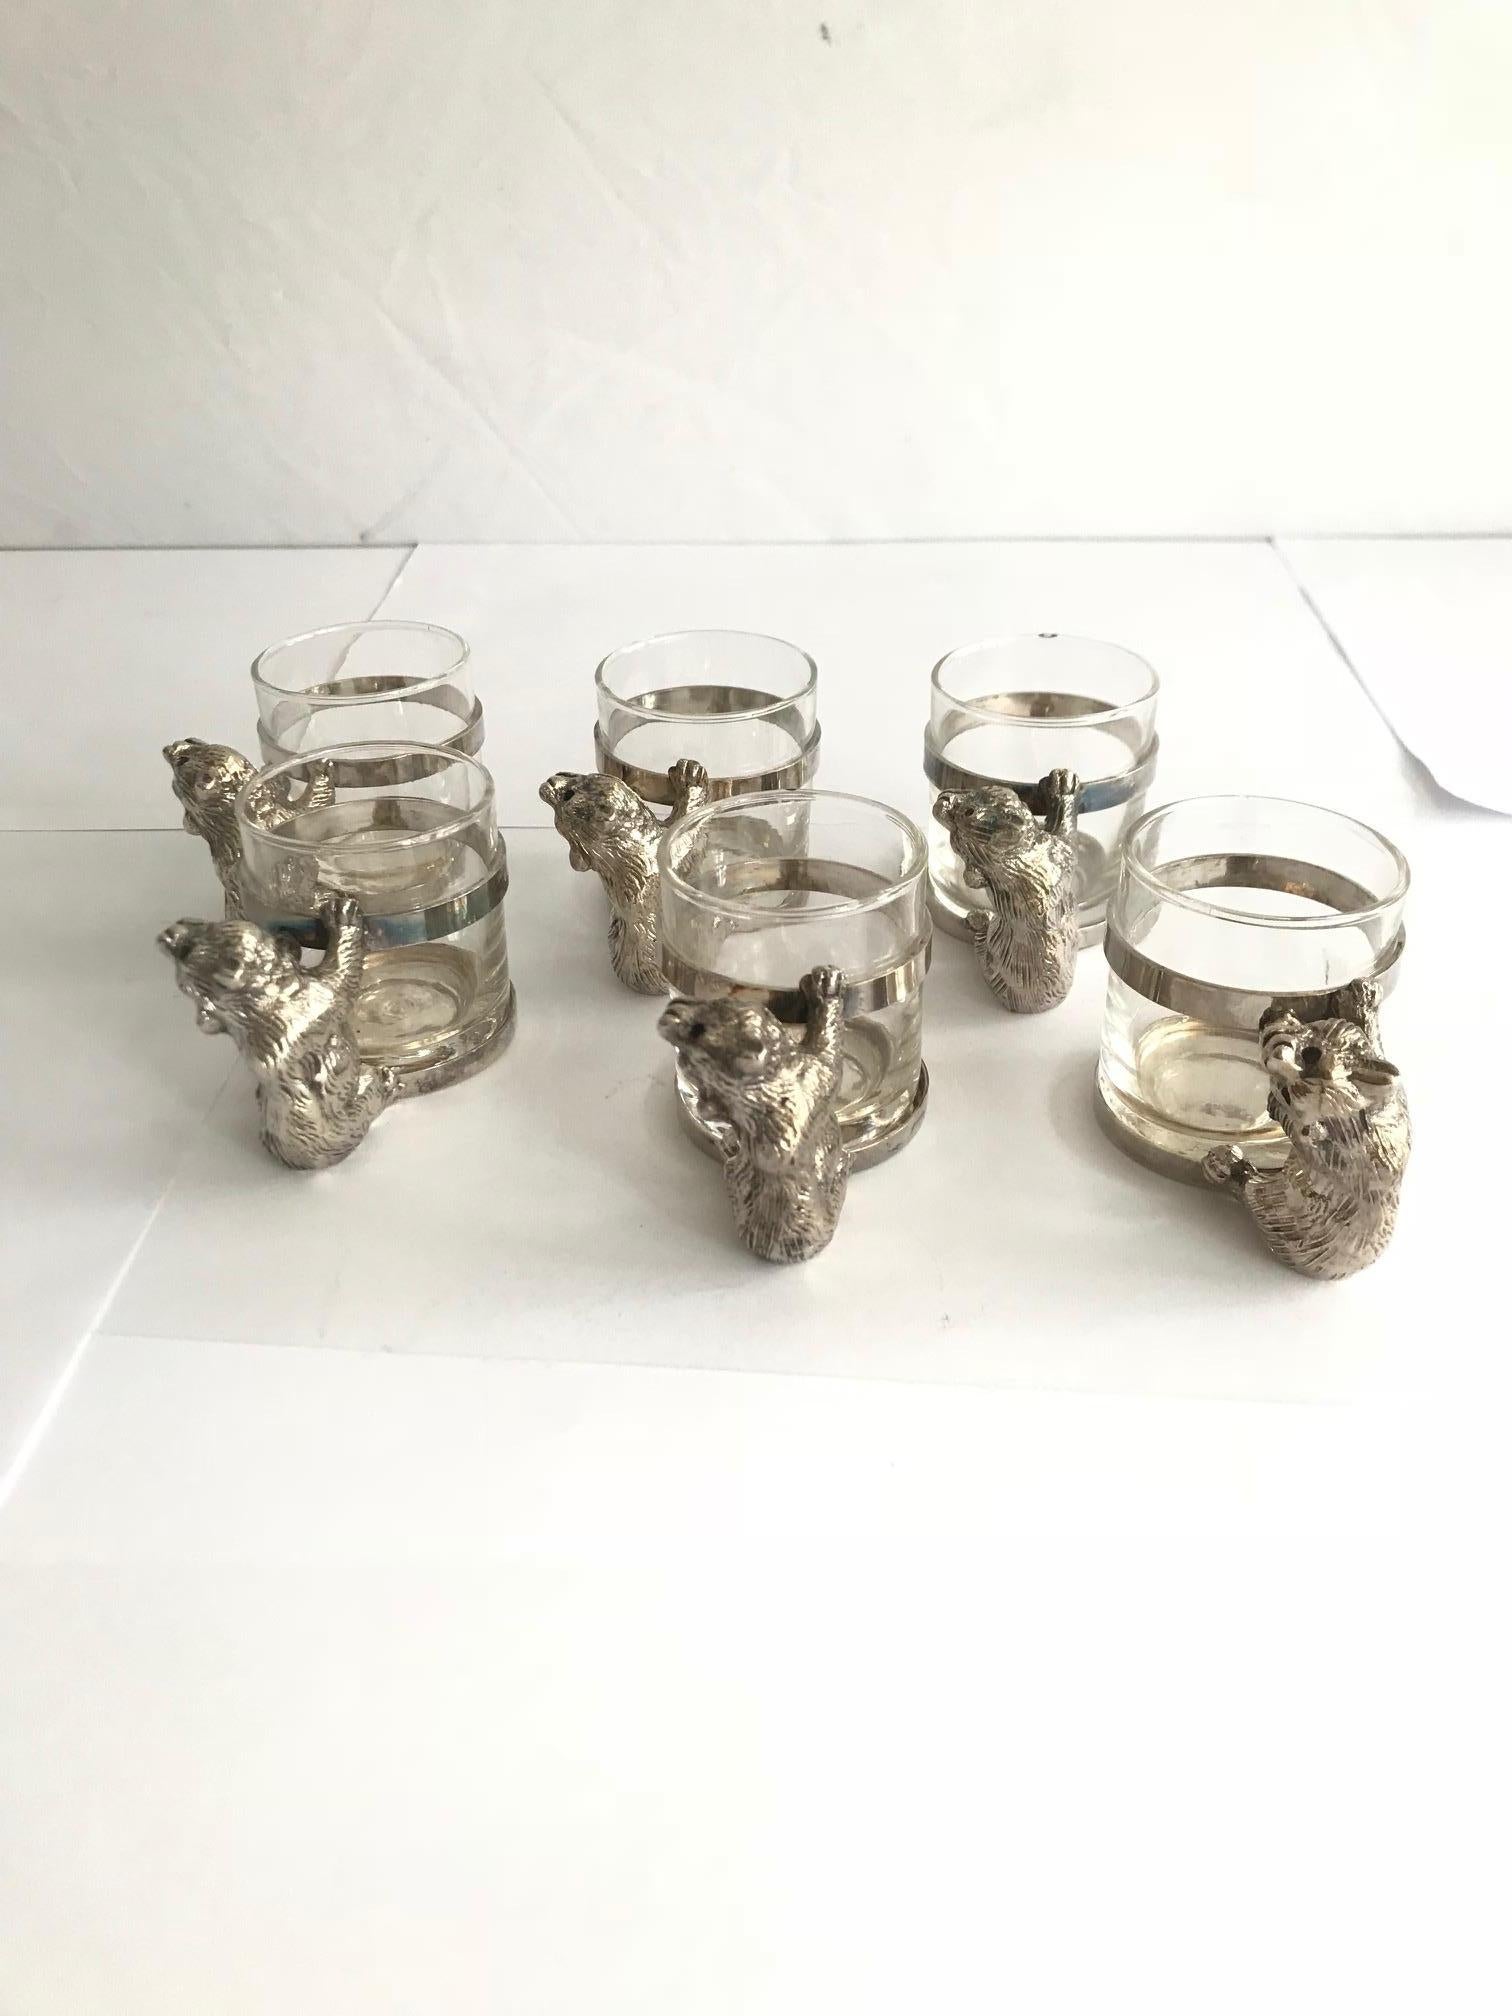 Gorgeous Russian vodka and caviar set in glass and silver plate
Comes with six glass shot glasses with silver plate bears
Main vessel has the inner insert dish for caviar
Shot glass H 5 cm or 2in. D 4 cm. or 1.5 in.
Great collectors piece.